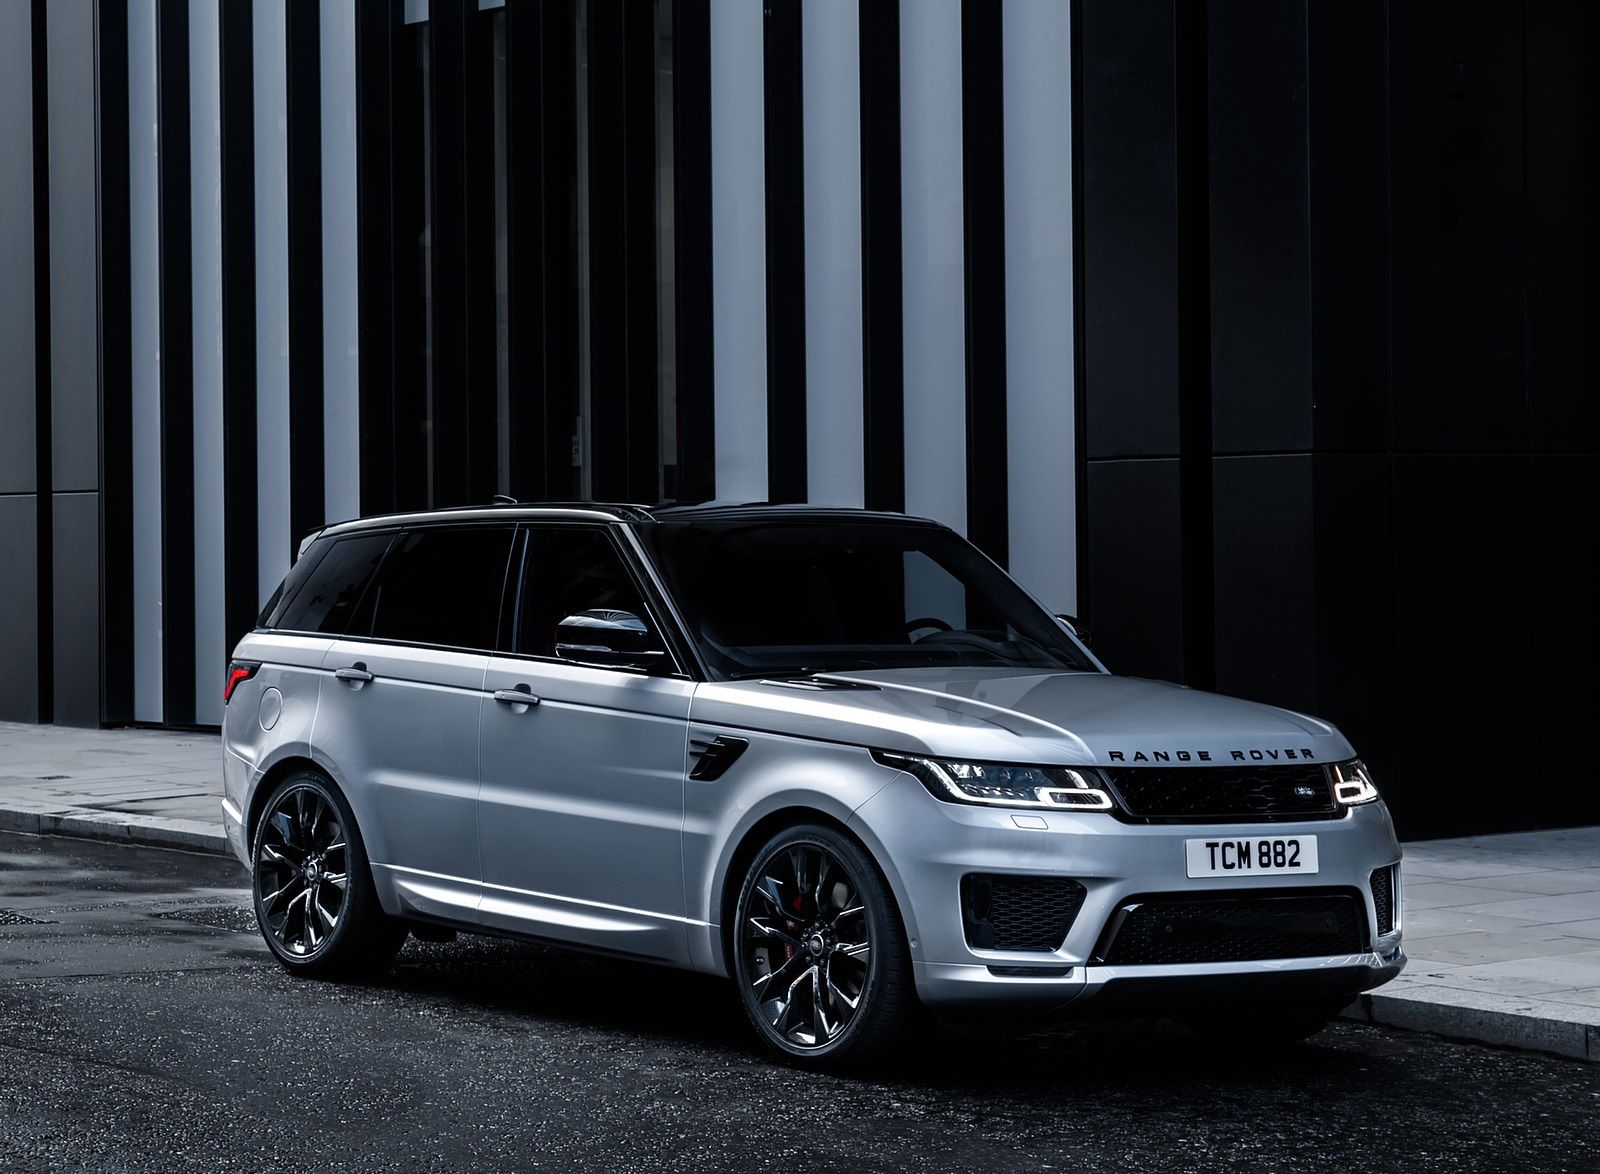 Range Rover Sport HST Special Edition Wallpaper (HD Image)